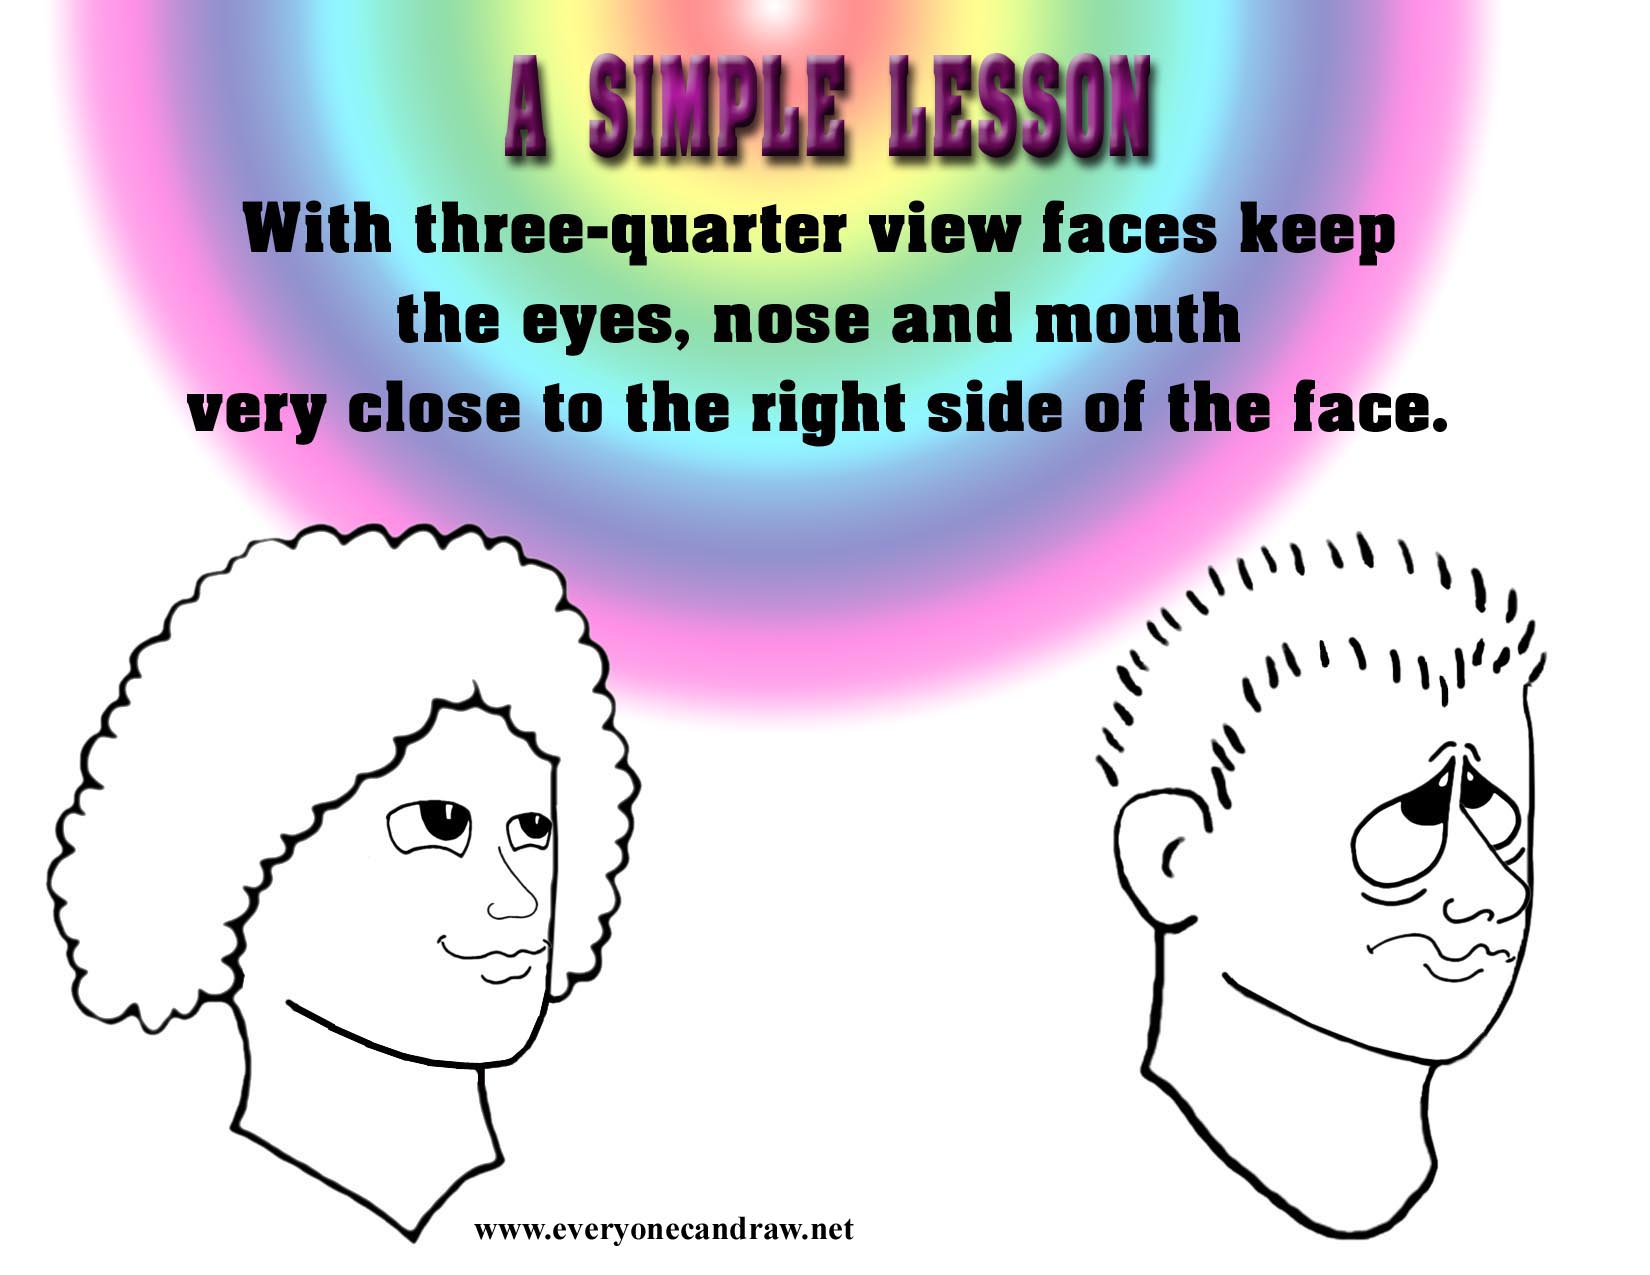 Facing right- 3-4 simple lesson